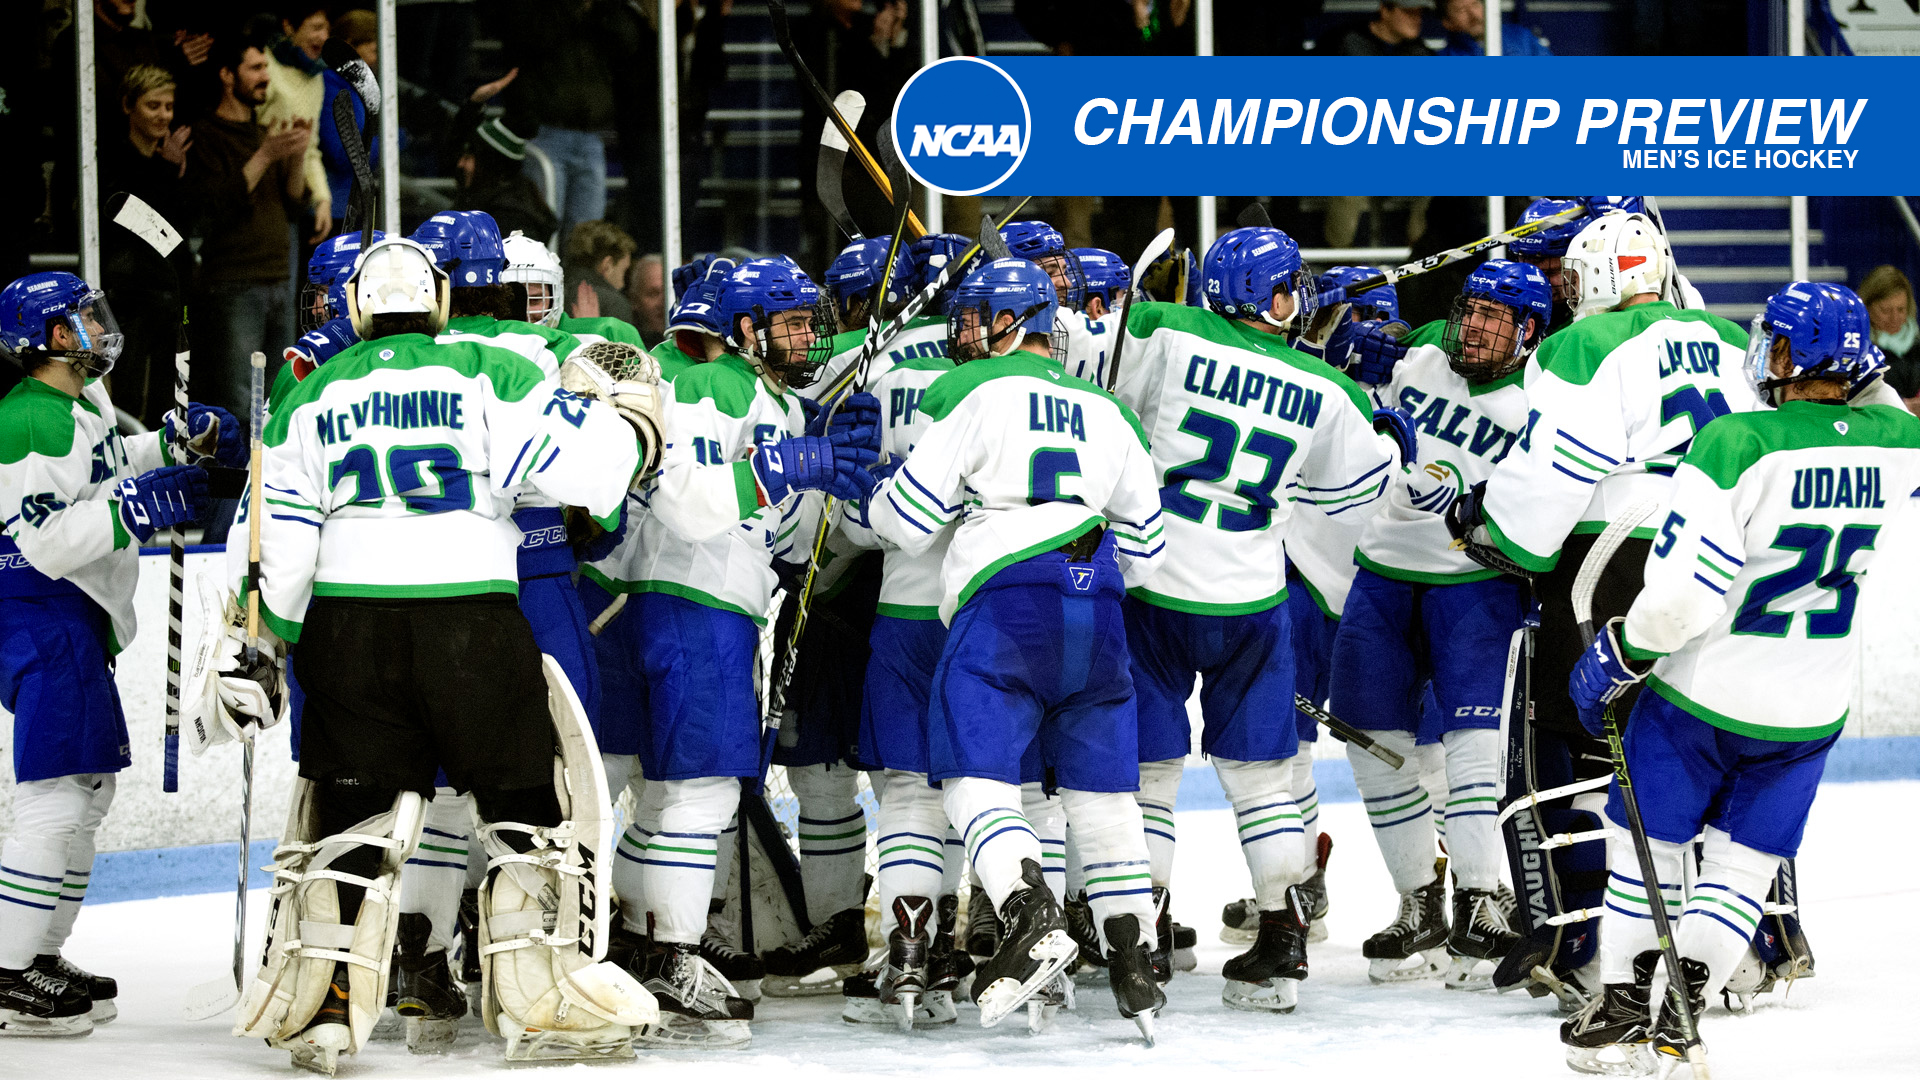 Salve Regina will play for its first-ever National Championship versus St. Norbert College on Saturday.